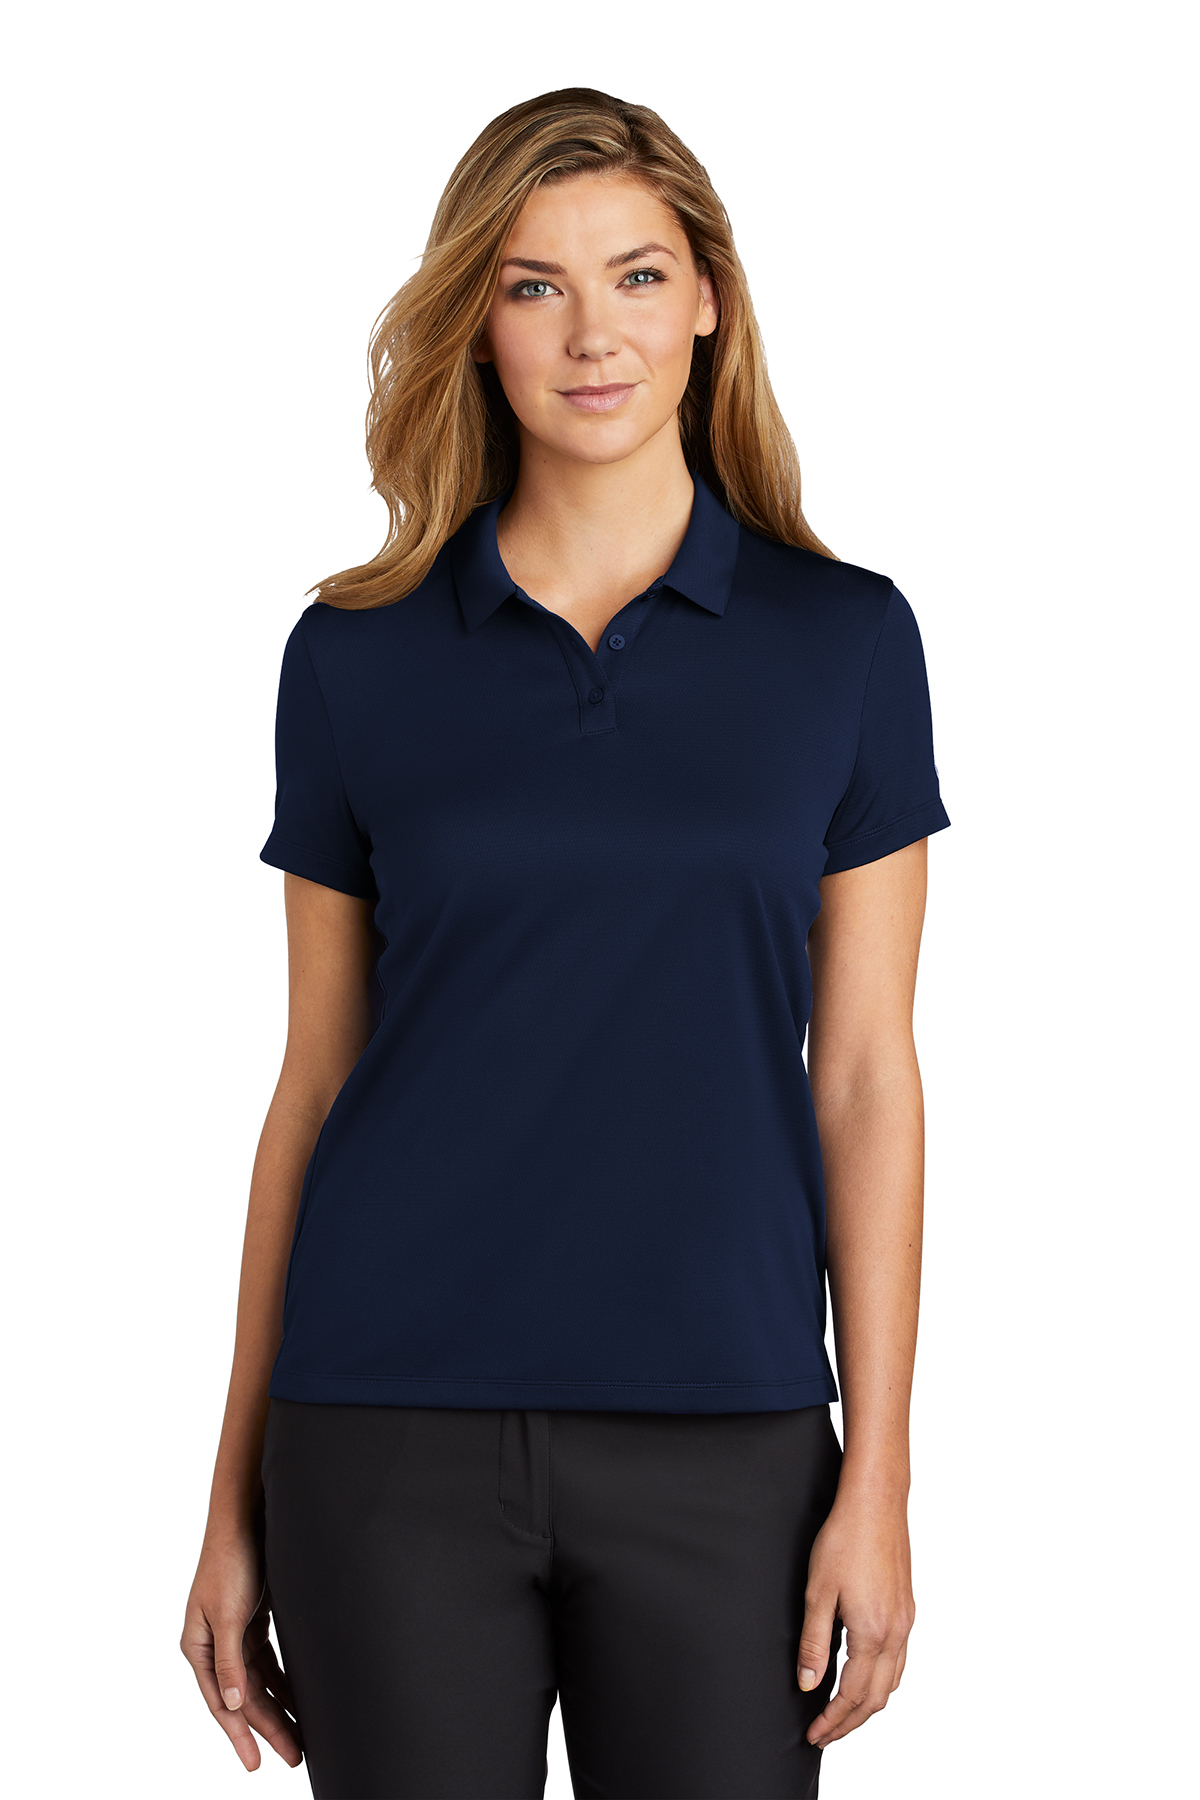 Nike NKBV6042 Dry Essential Solid Polo - Midnight Navy